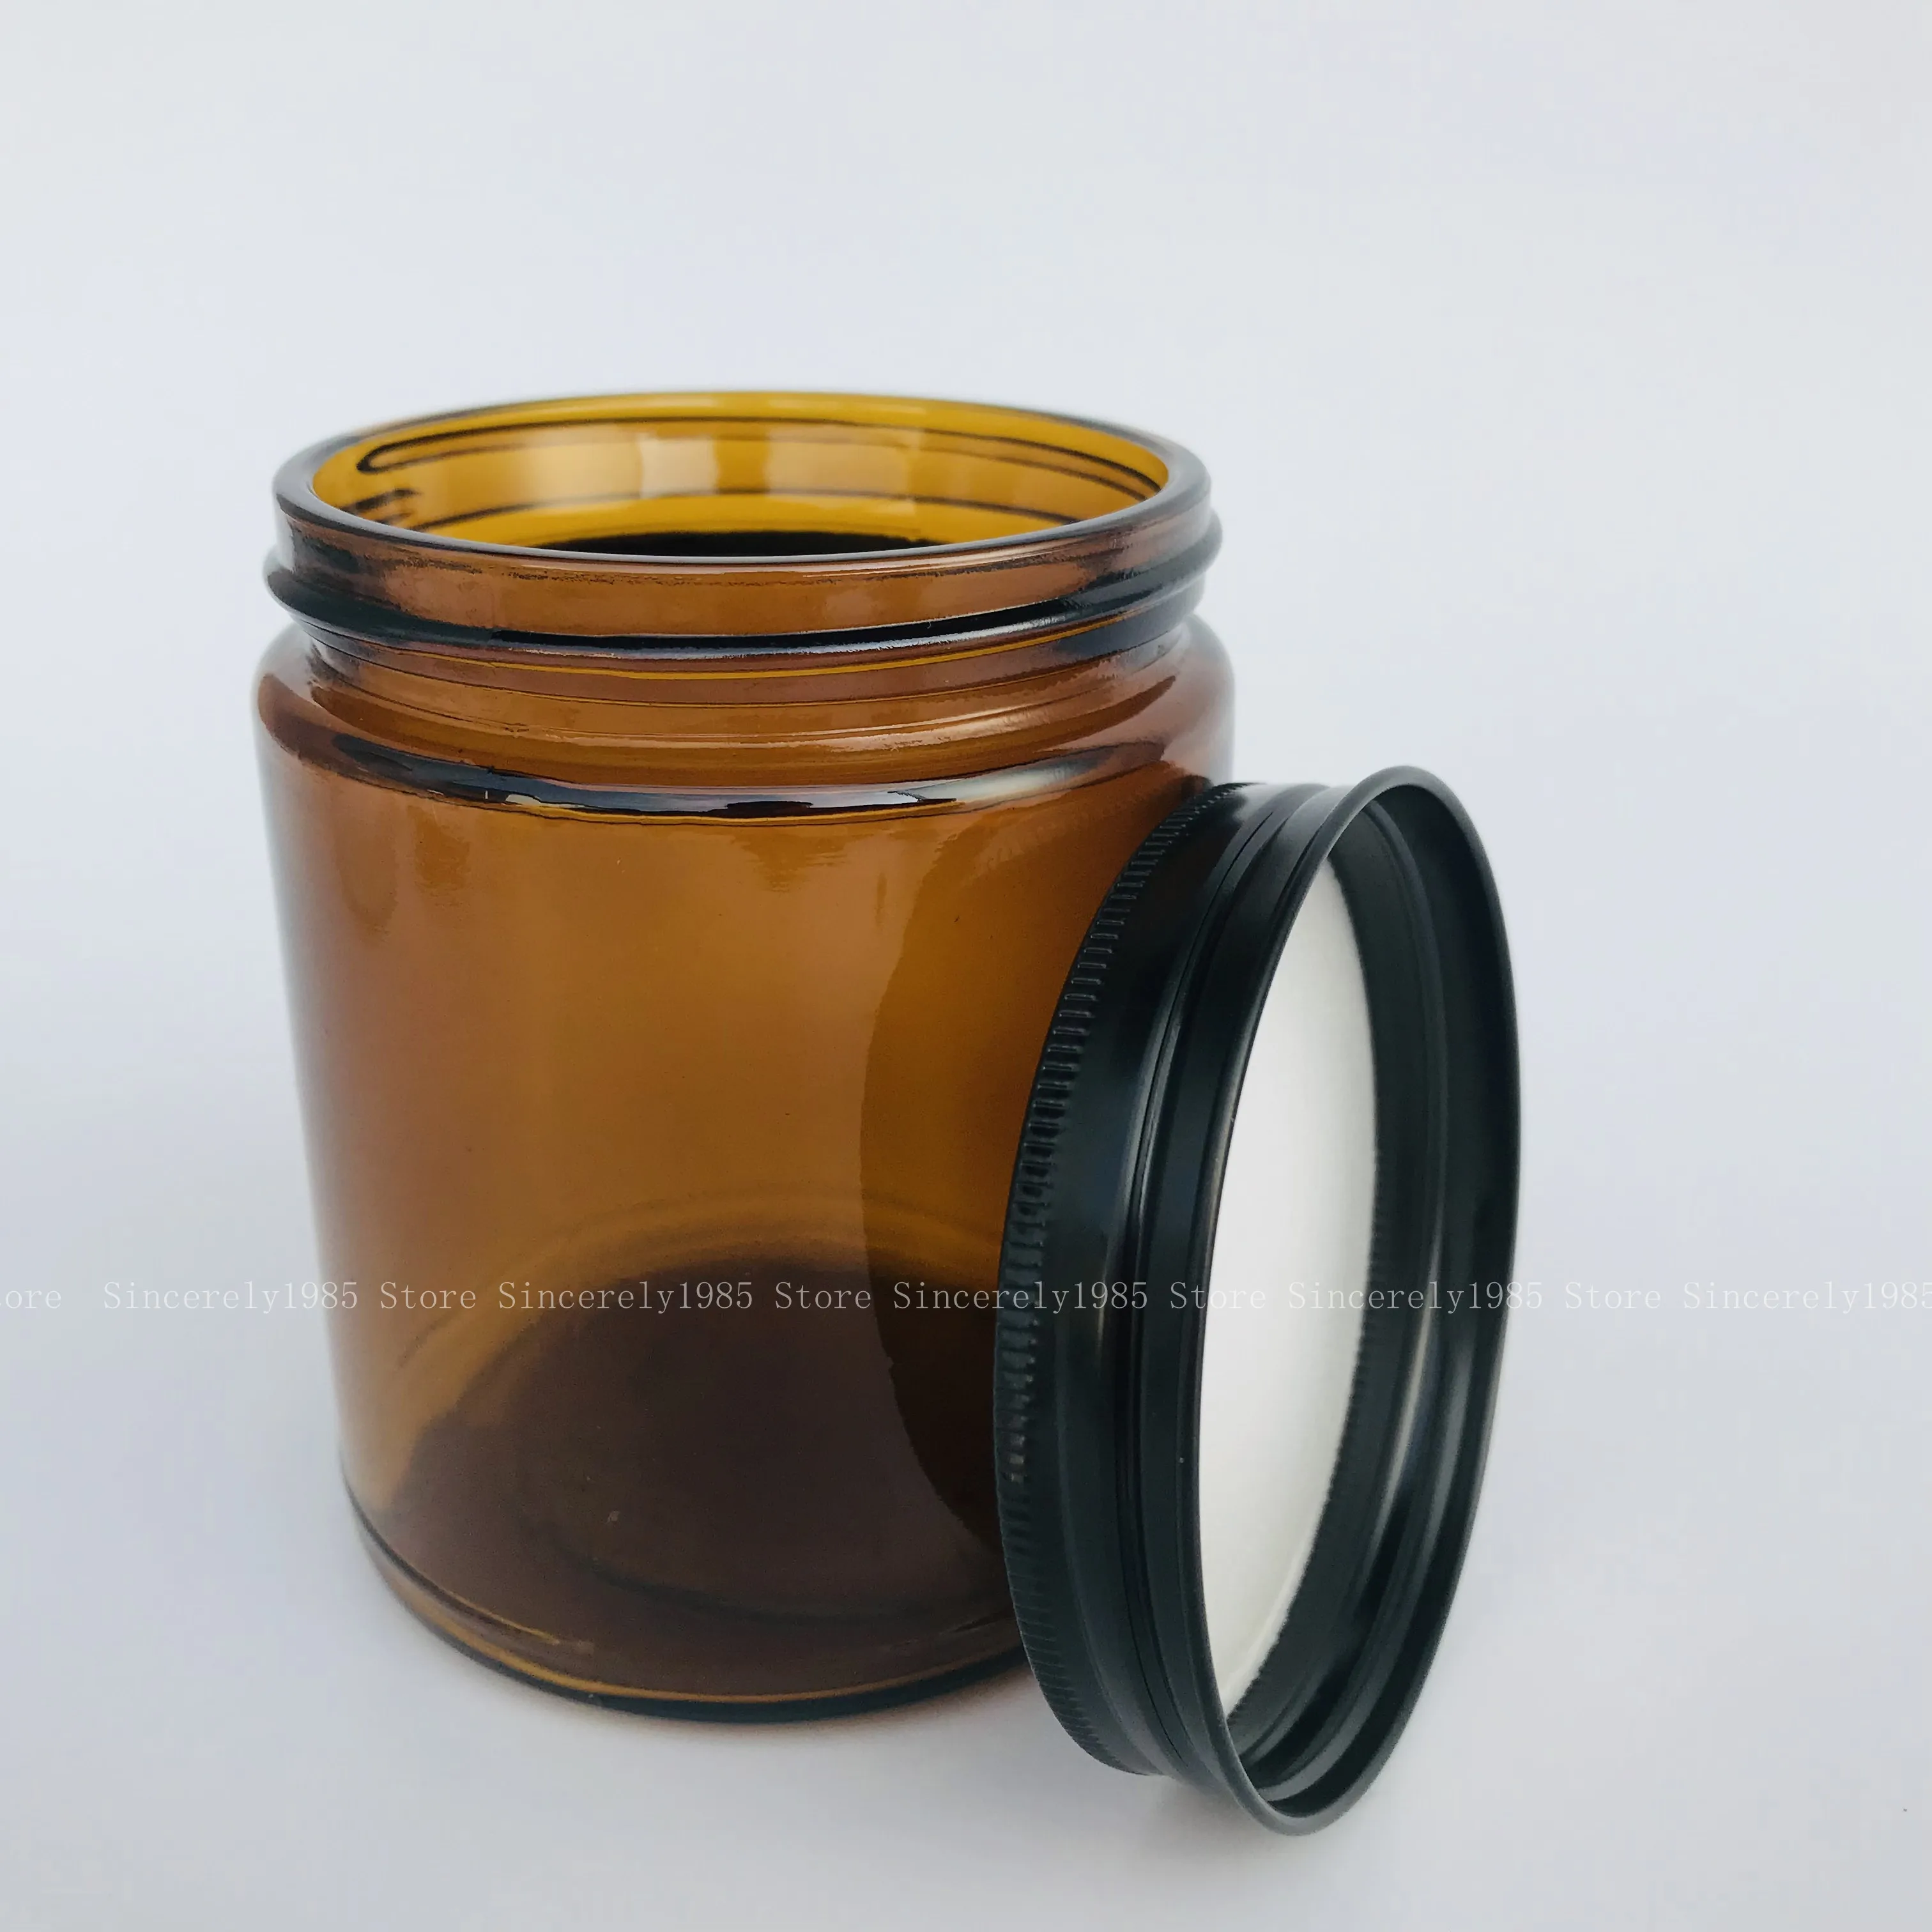 2pcs 250ml Amber Glass Candle Jars Empty Round Cosmetic Jar for DIY Aromatherapy Wax Melts Candles Salve Lotion Cream Storage smokeless candles amber